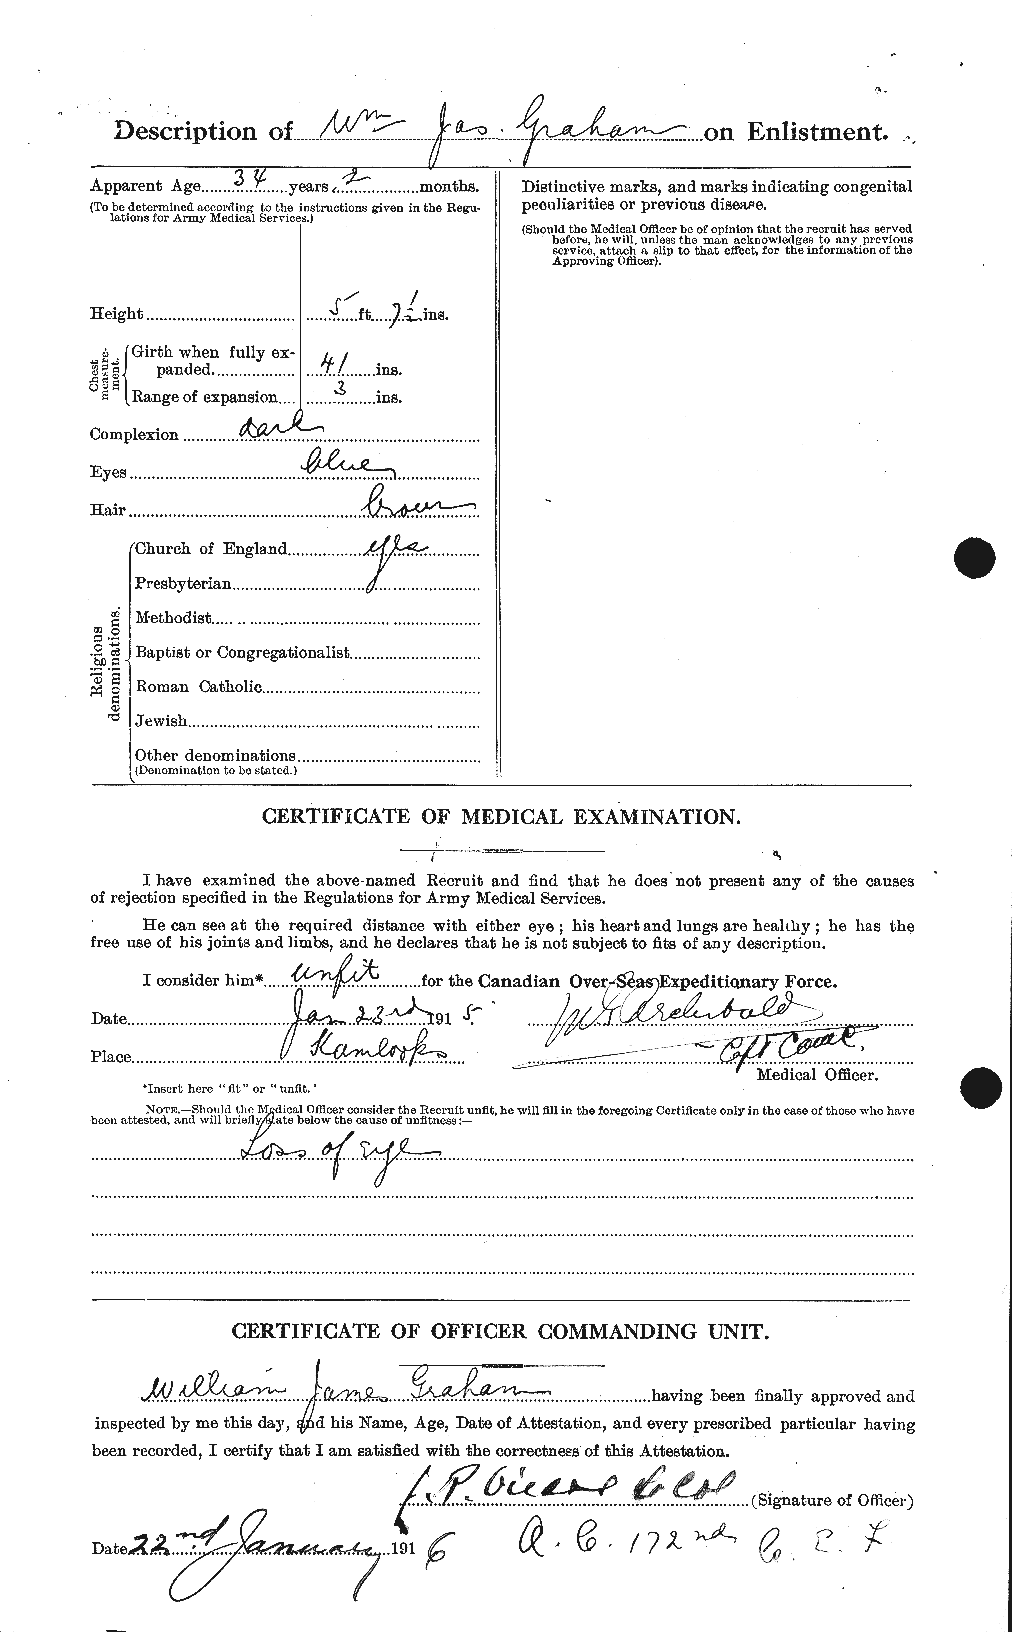 Personnel Records of the First World War - CEF 691150b